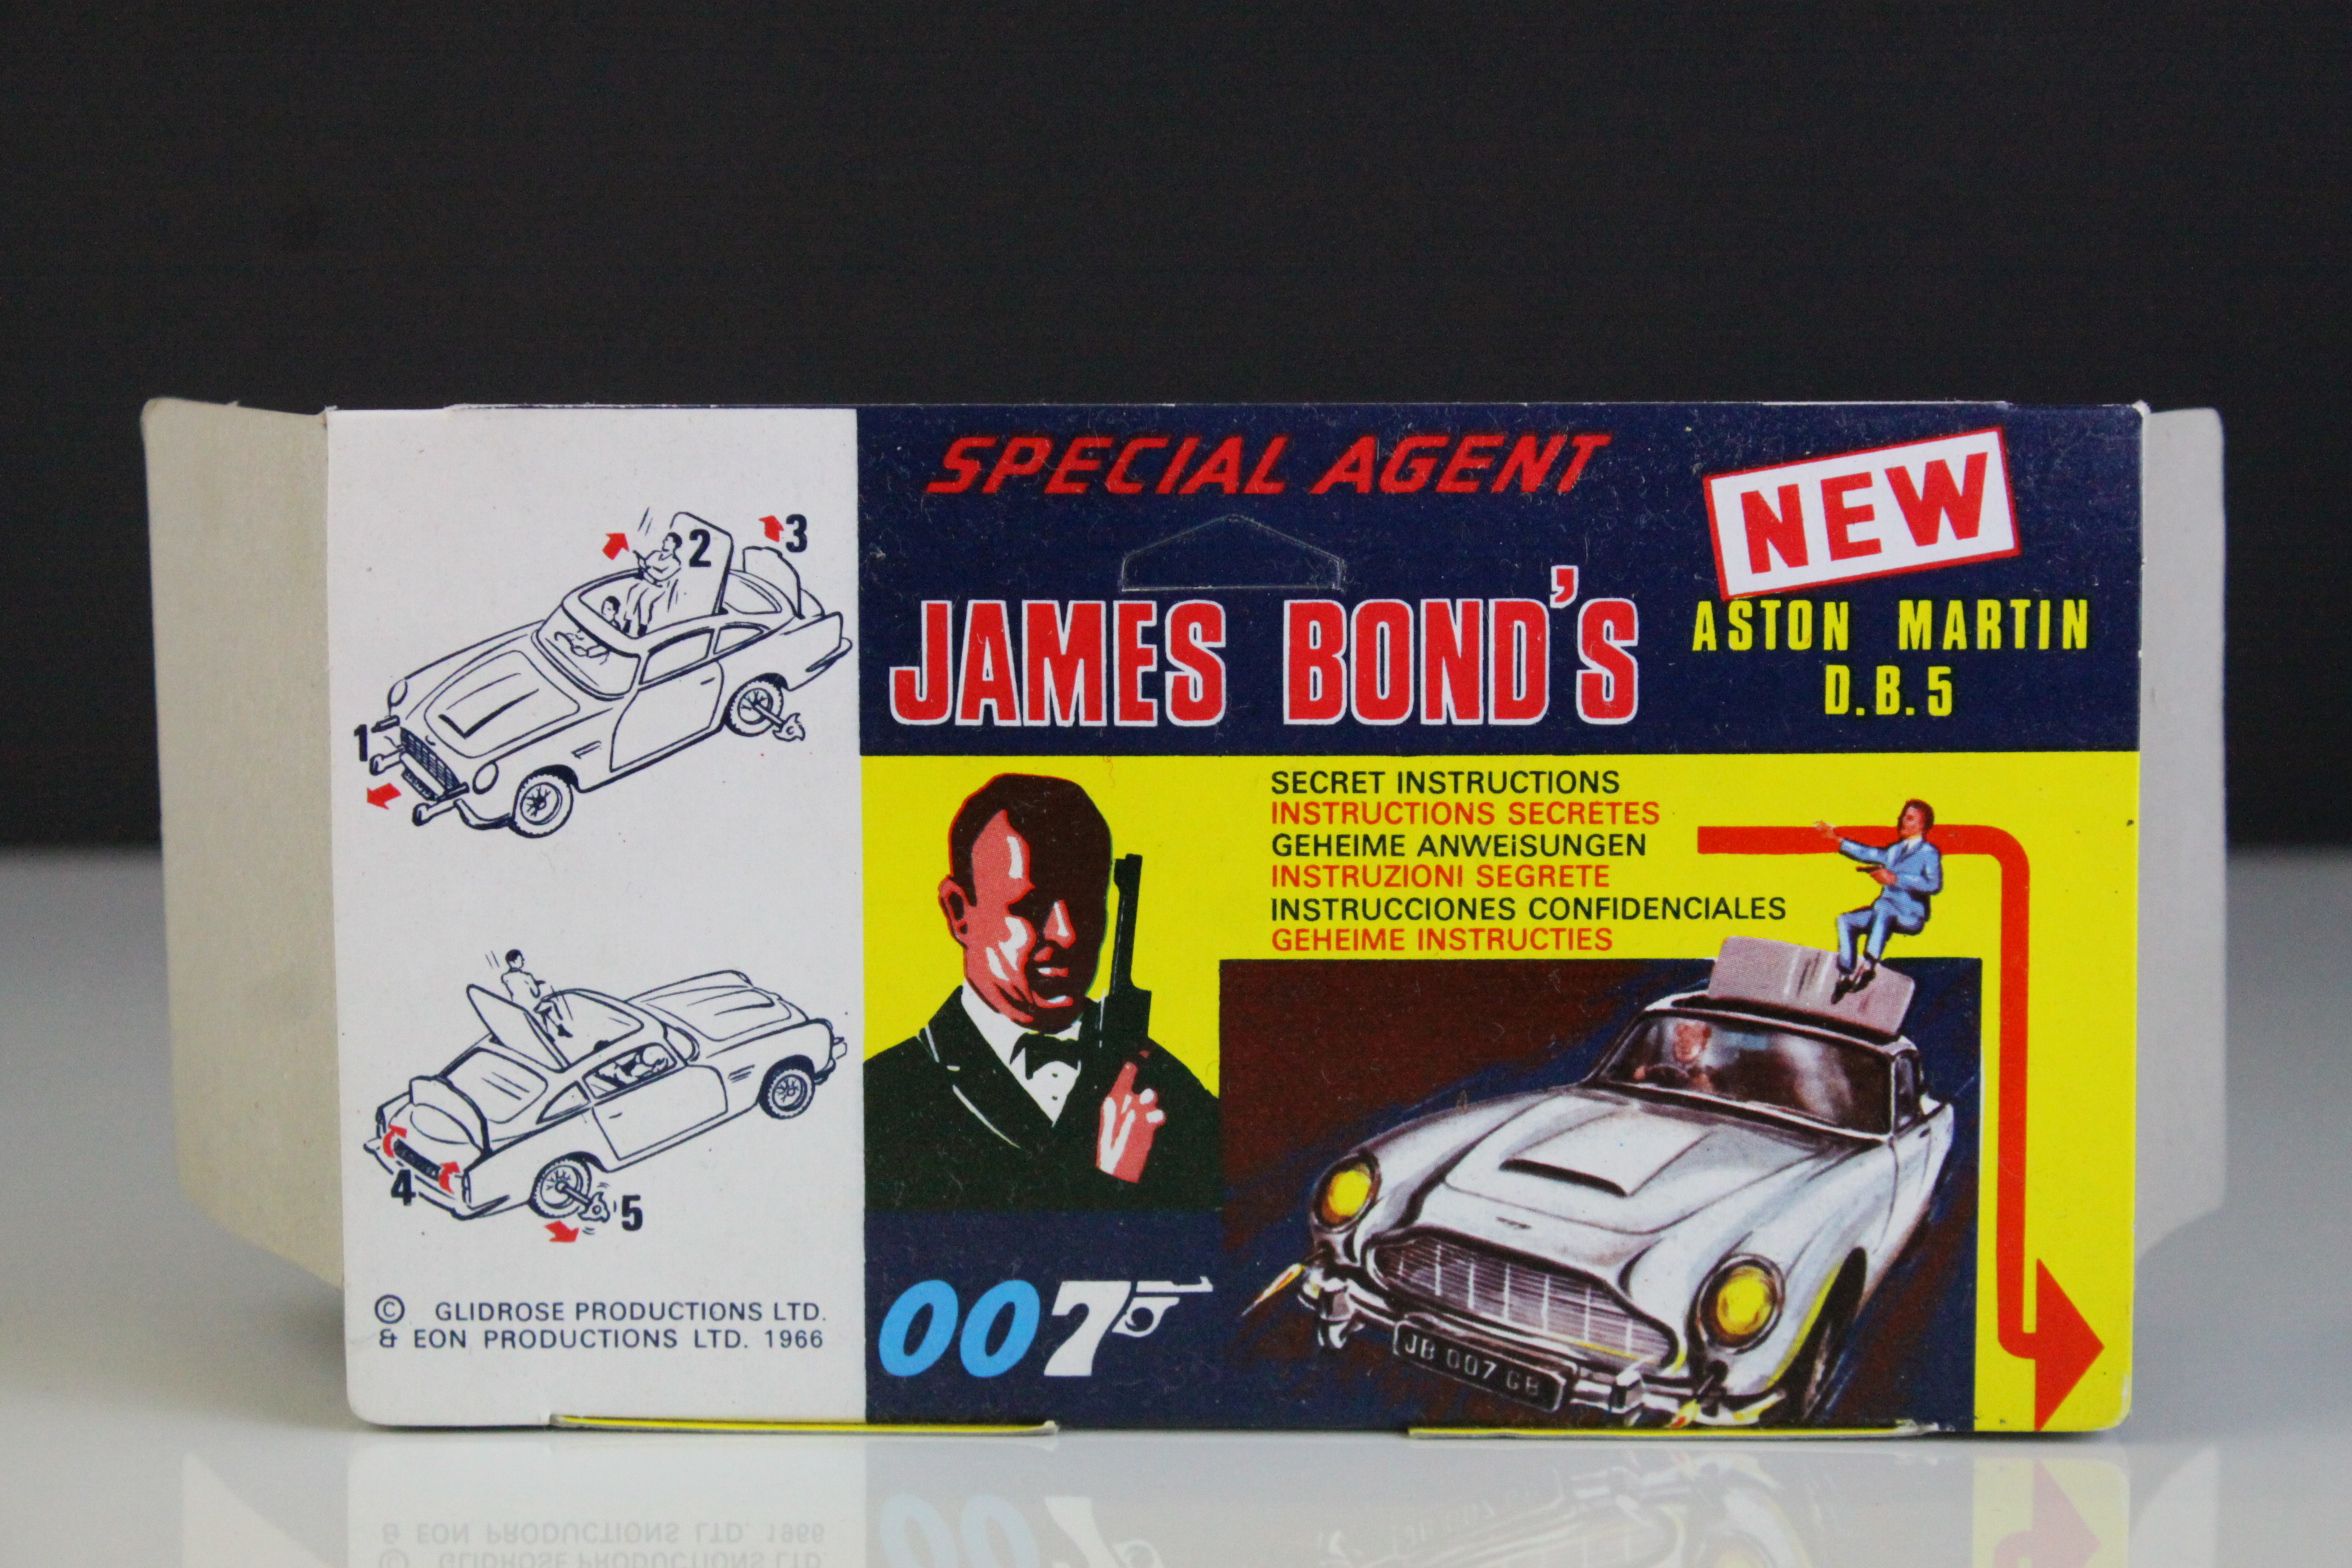 Boxed Corgi 270 The James Bond 007 Aston Martin diecast model appearing to be complete and unremoved - Image 5 of 9